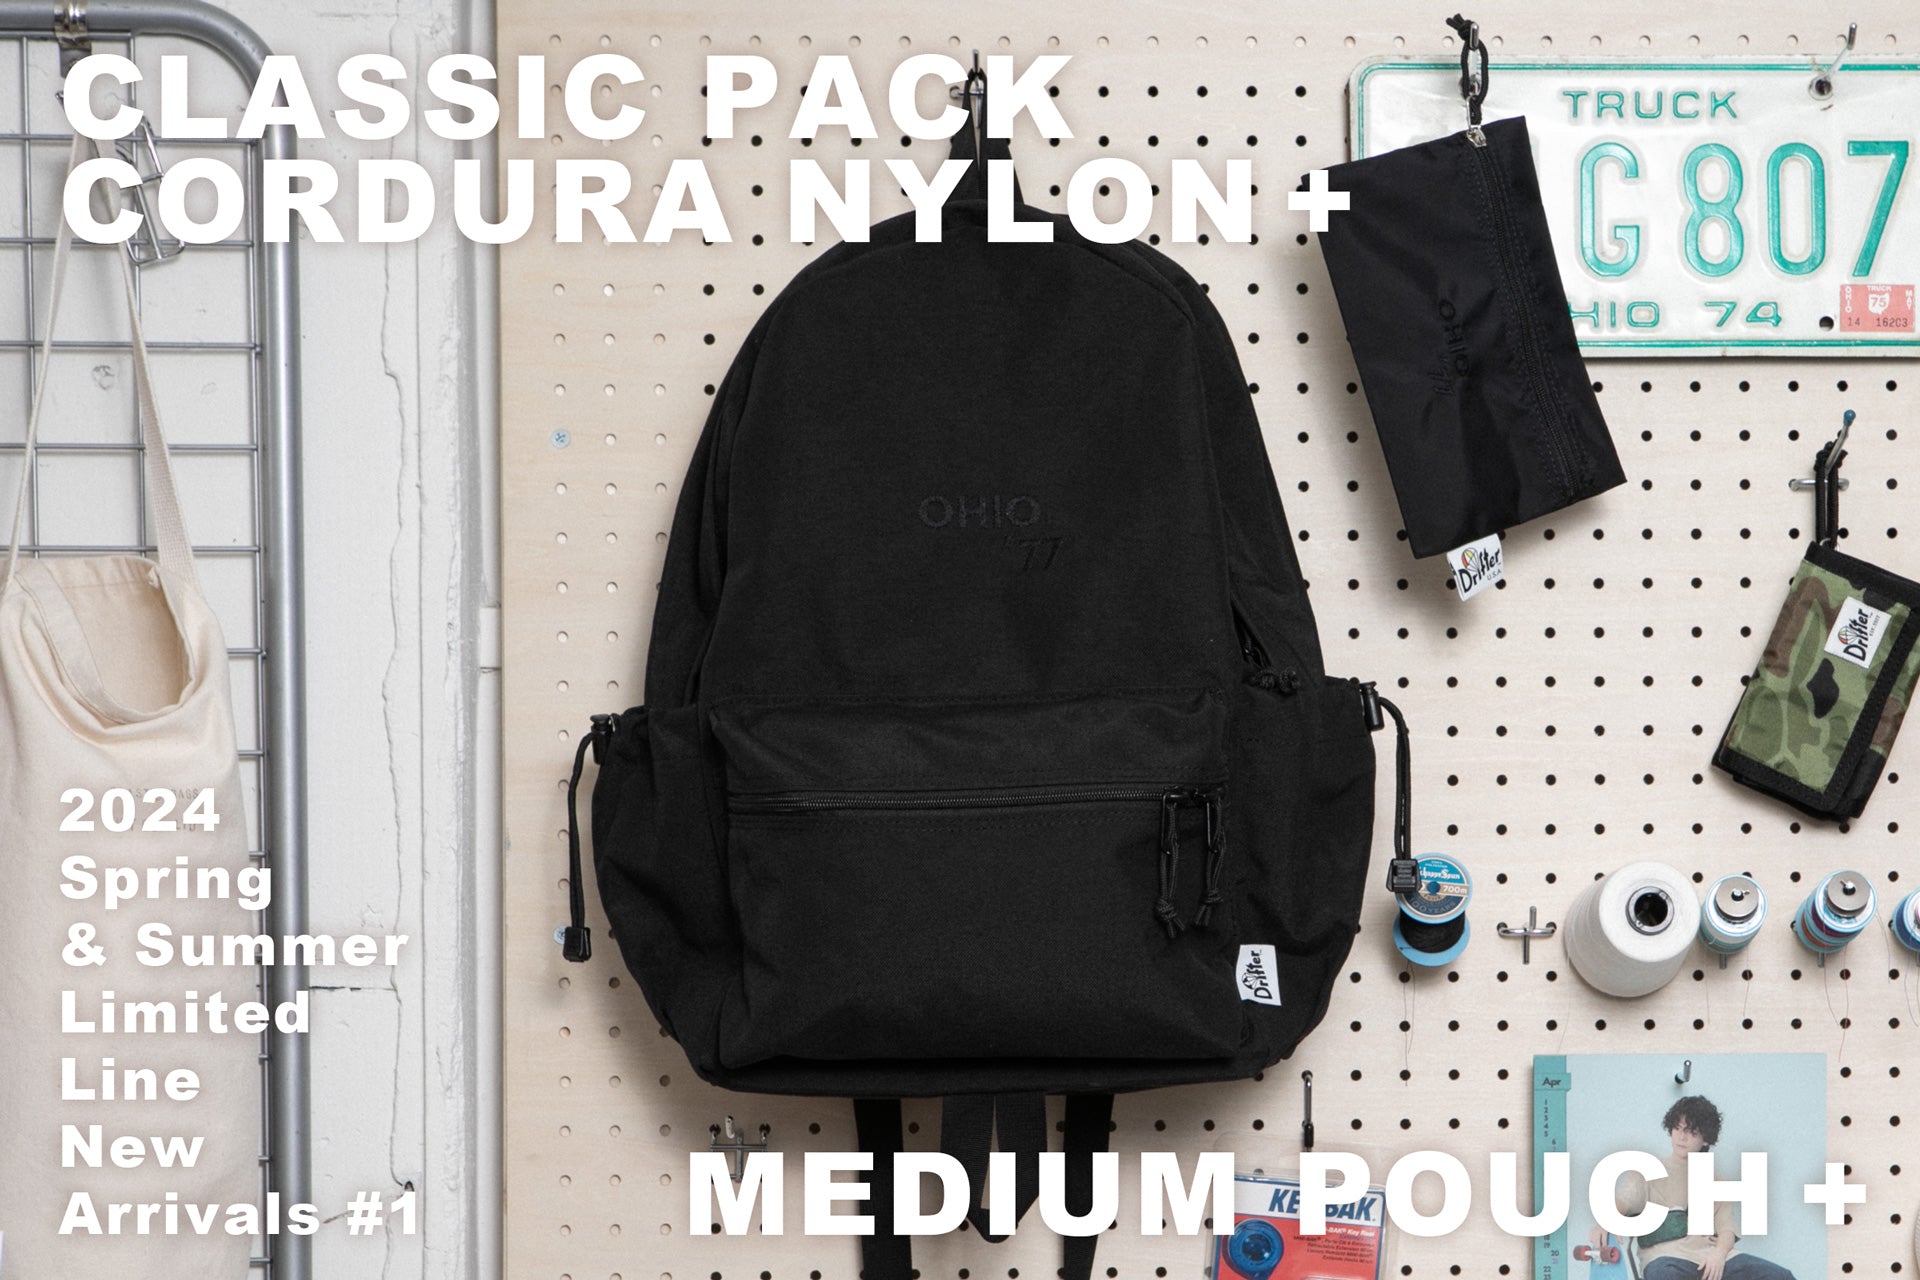 【CLASSIC PACK CORDURA NYLON + & MEDIUM POUCH +】24SS Limited Line New Arrivals #1 / 公式オンライン限定モデル新作レビュー